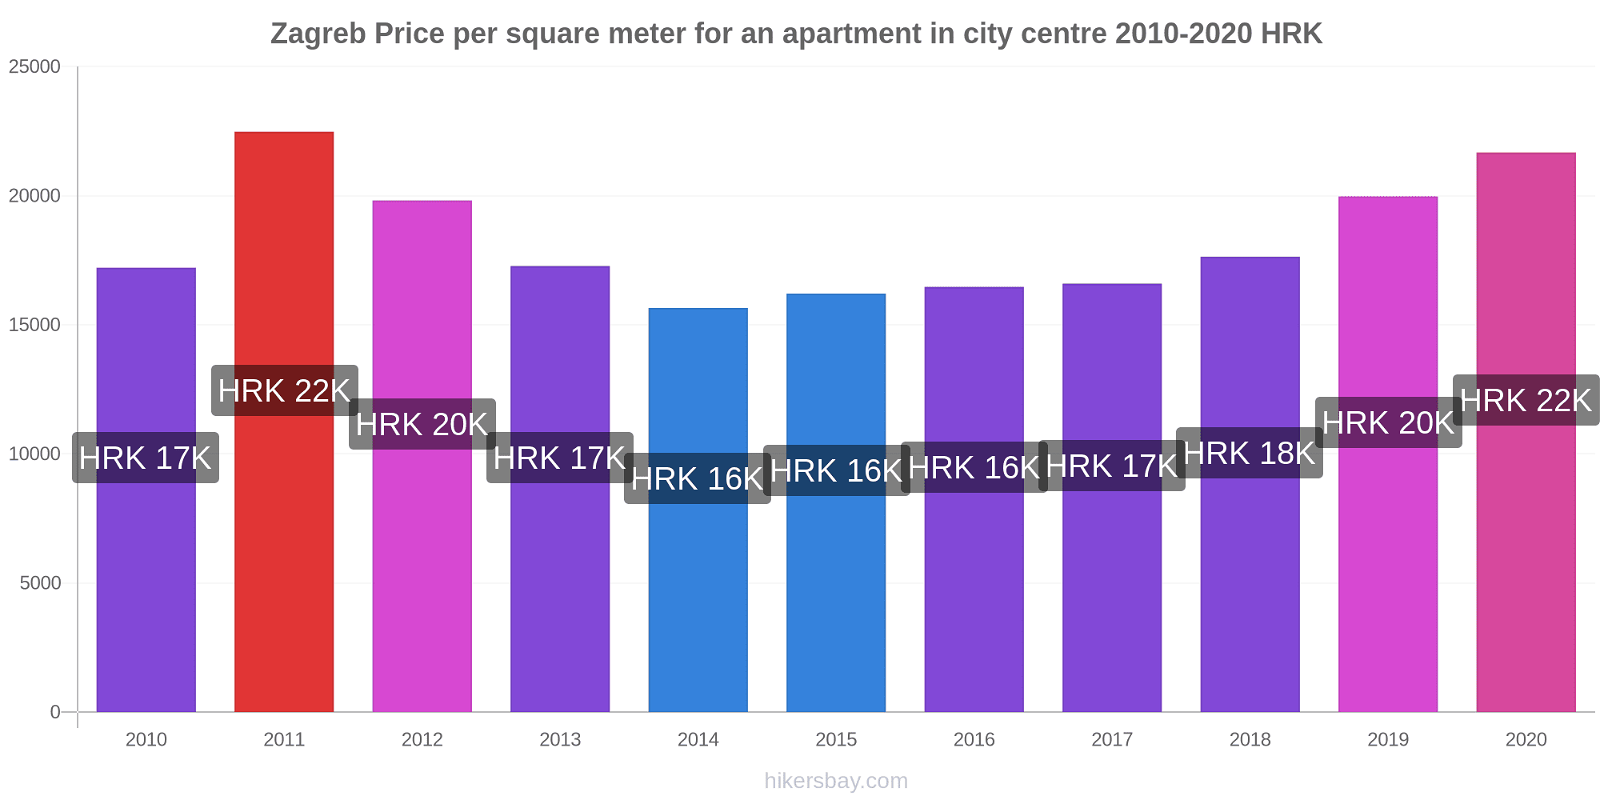 Zagreb price changes Price per square meter for an apartment in city centre hikersbay.com